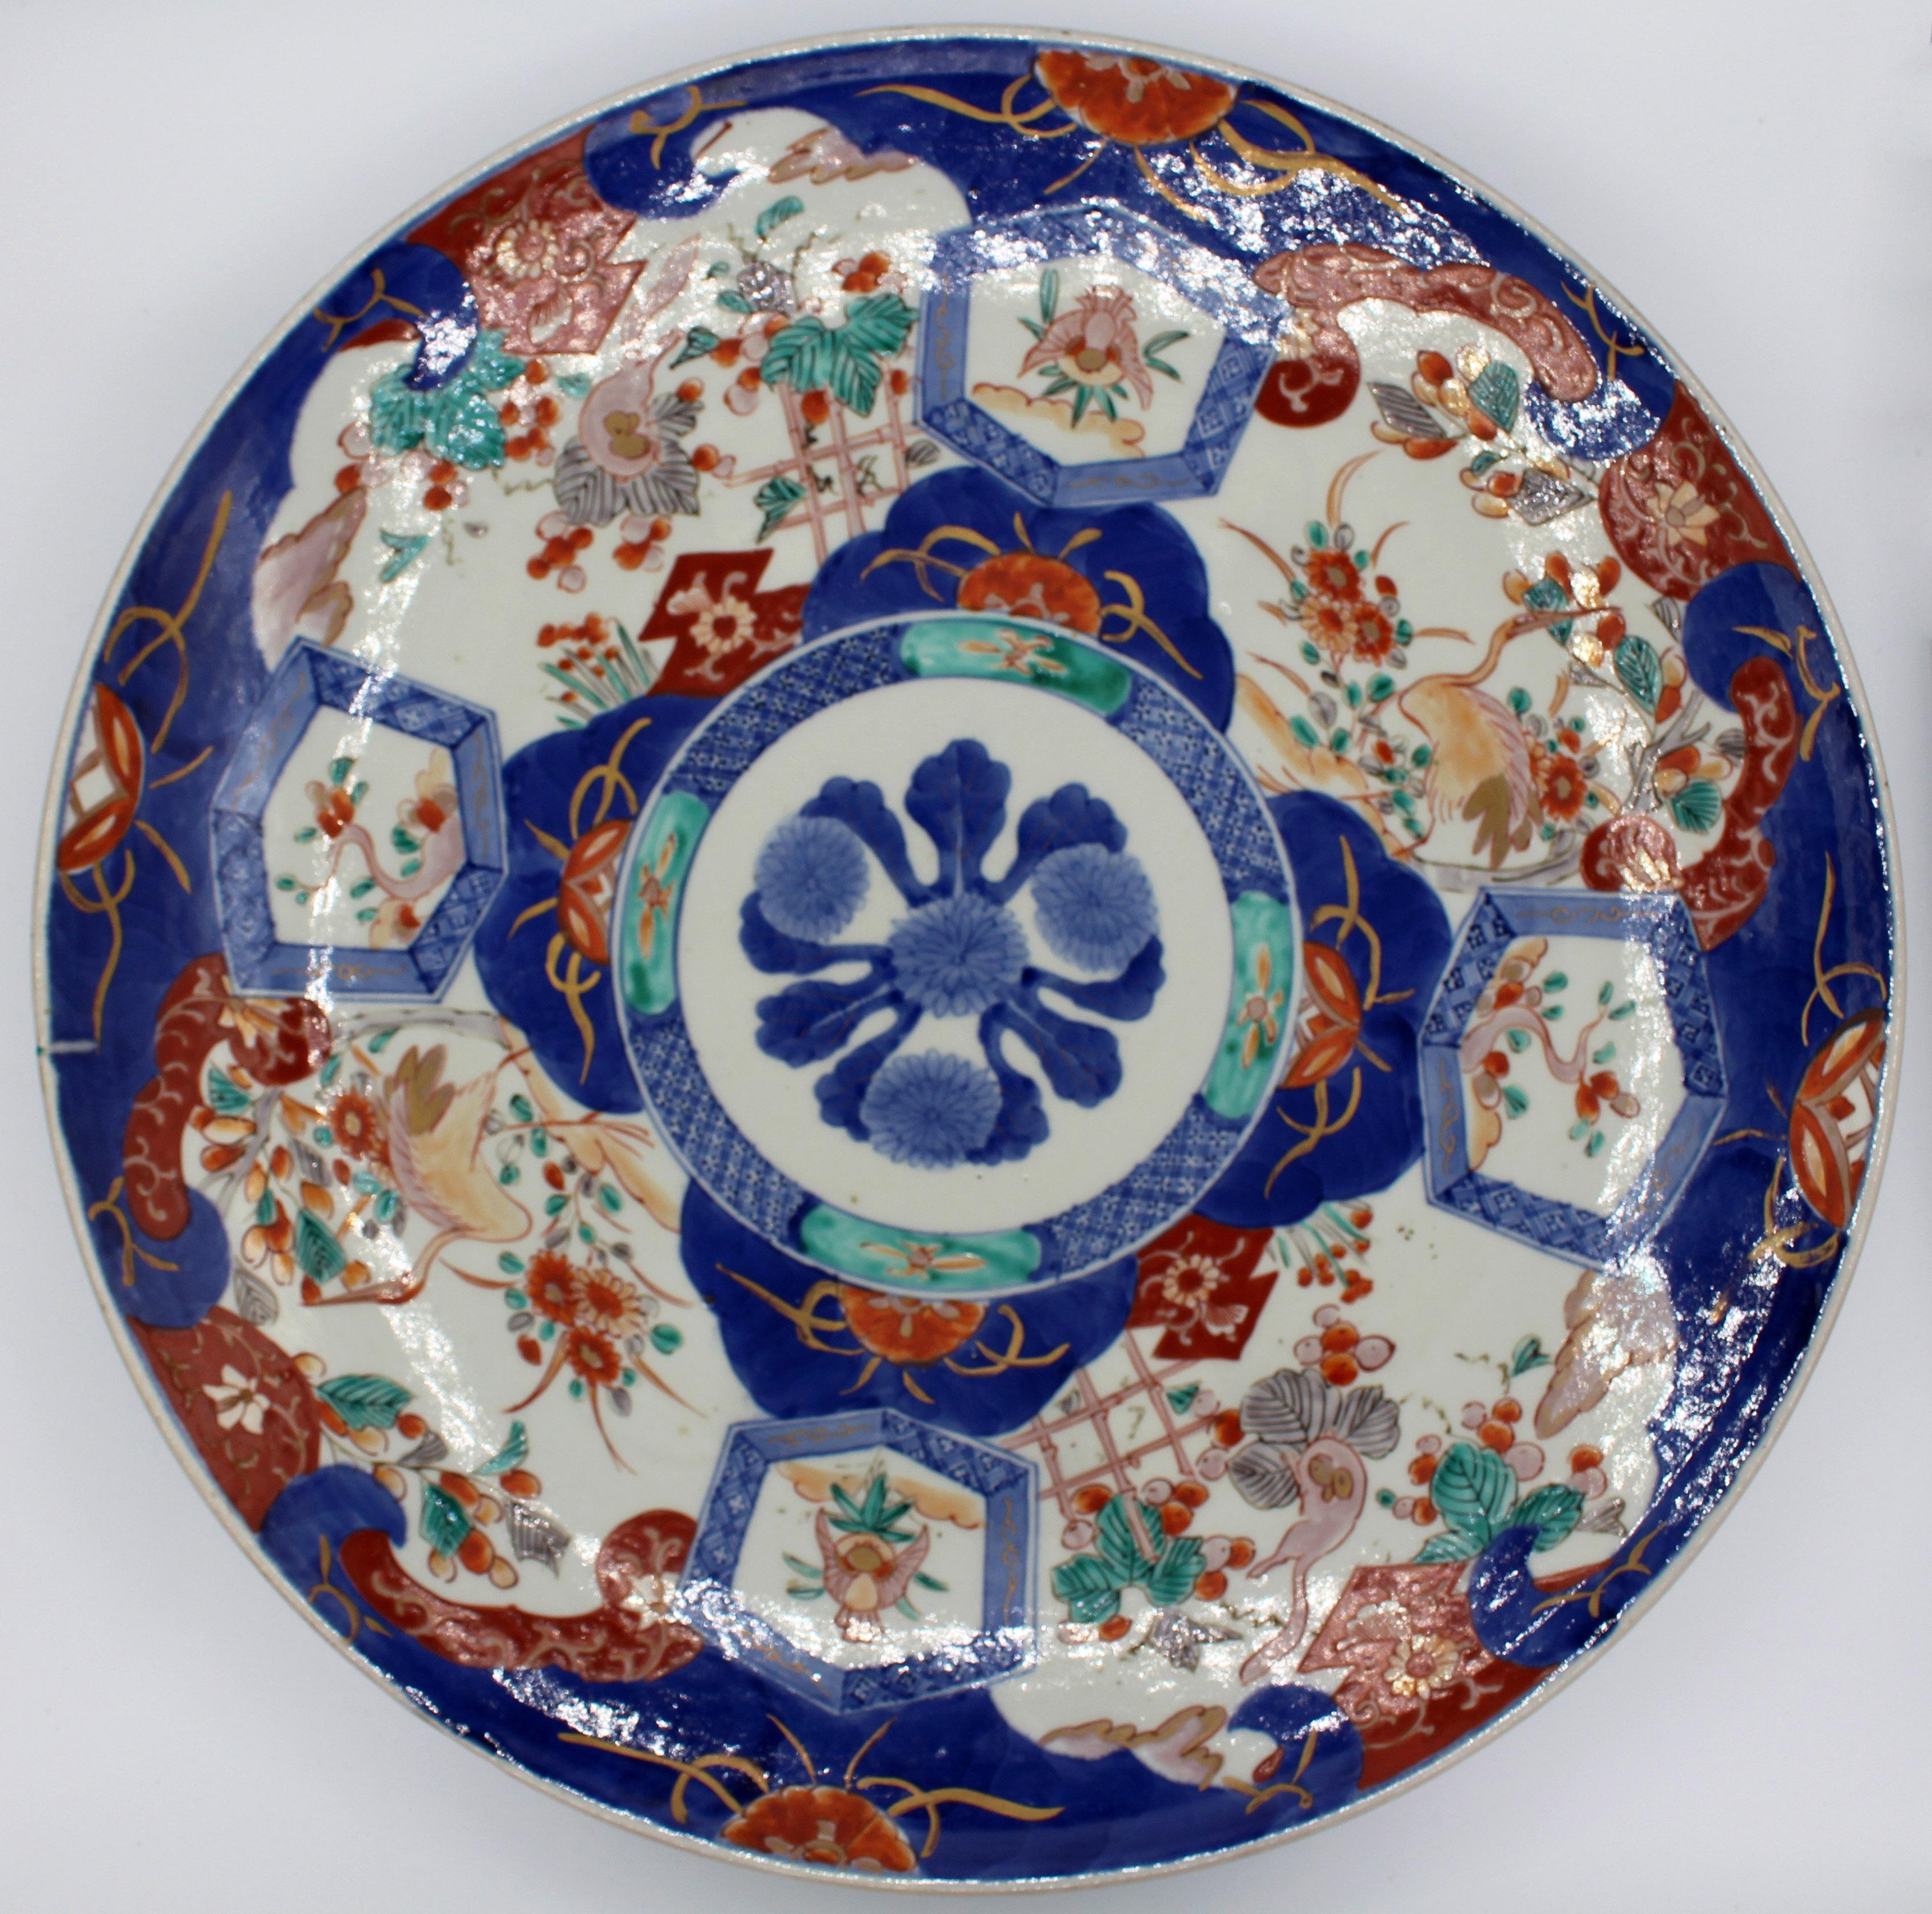 Circa 1870 large Imari charger. Well decorated with 4 alternating panels of the red-crowned crane or Tancho walking through foliage and bamboo lattice garden set off by 4 lozenges with birds & branches, around a central medallion. The turquoise